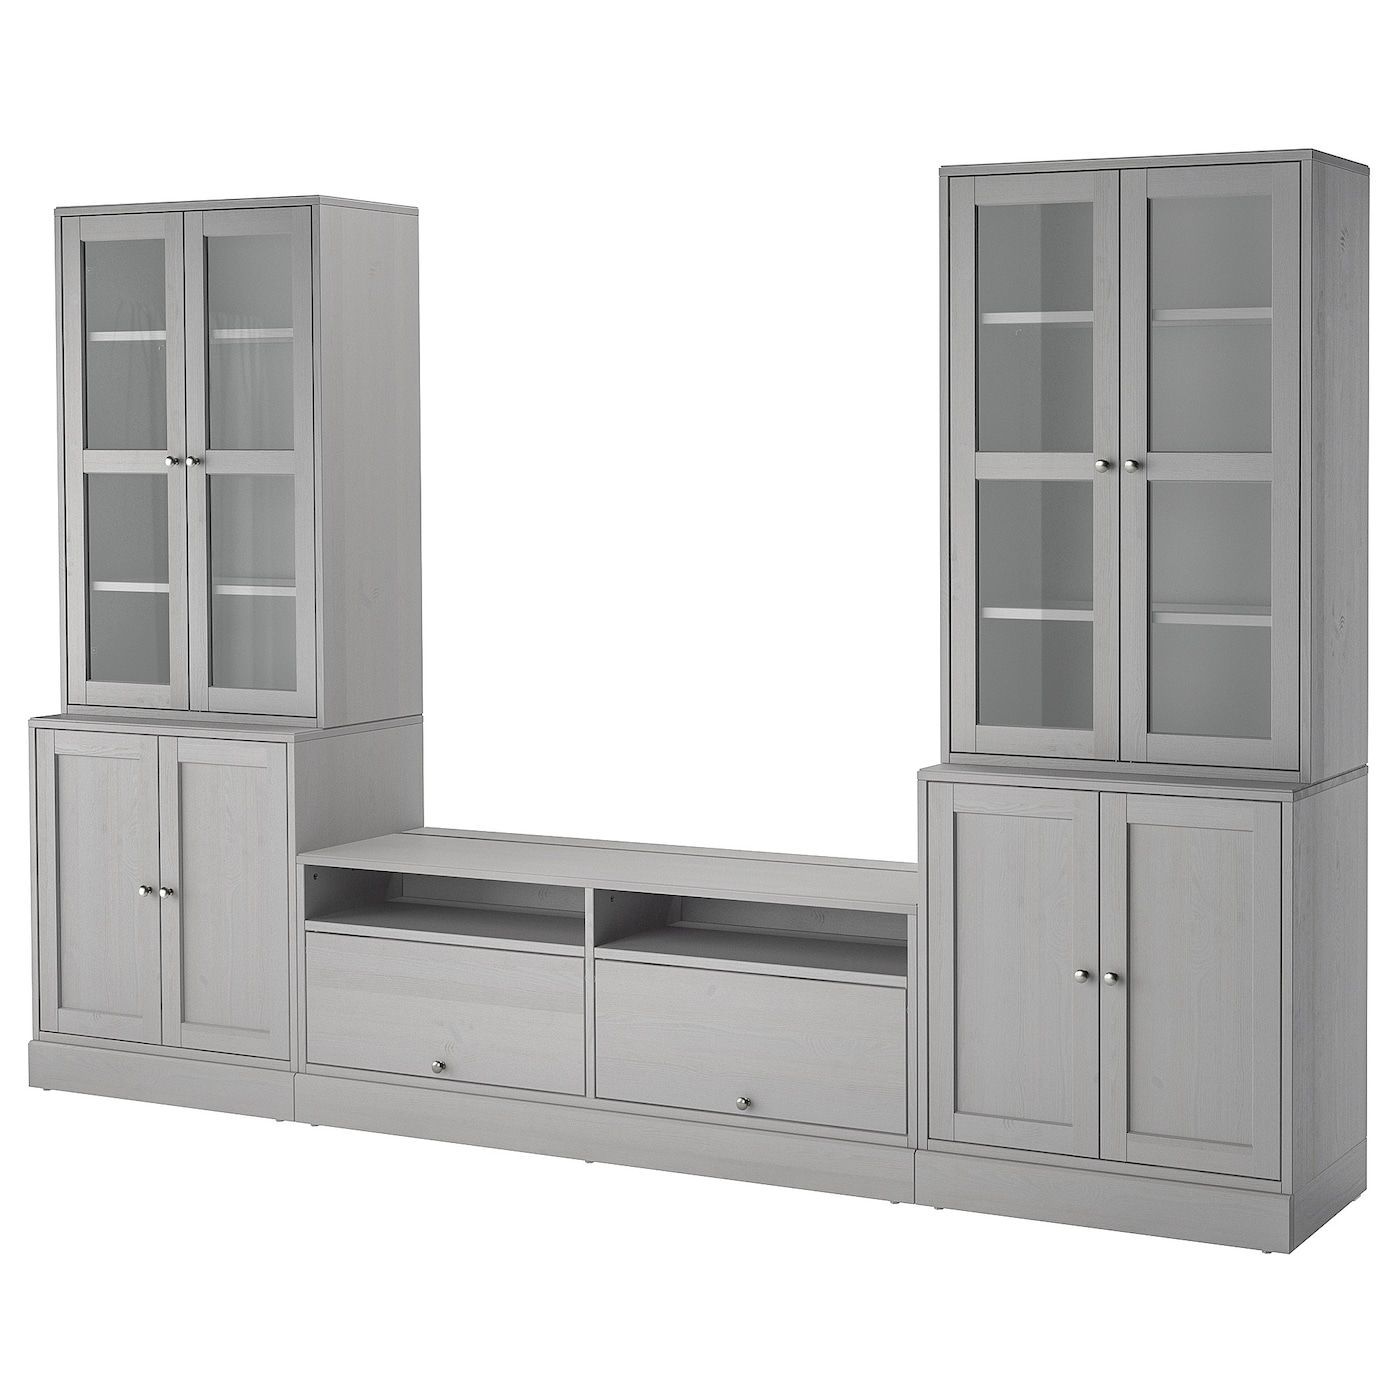 Ikea Us – Furniture And Home Furnishings | Tv Storage Regarding Ikea Built In Tv Cabinets (View 14 of 15)